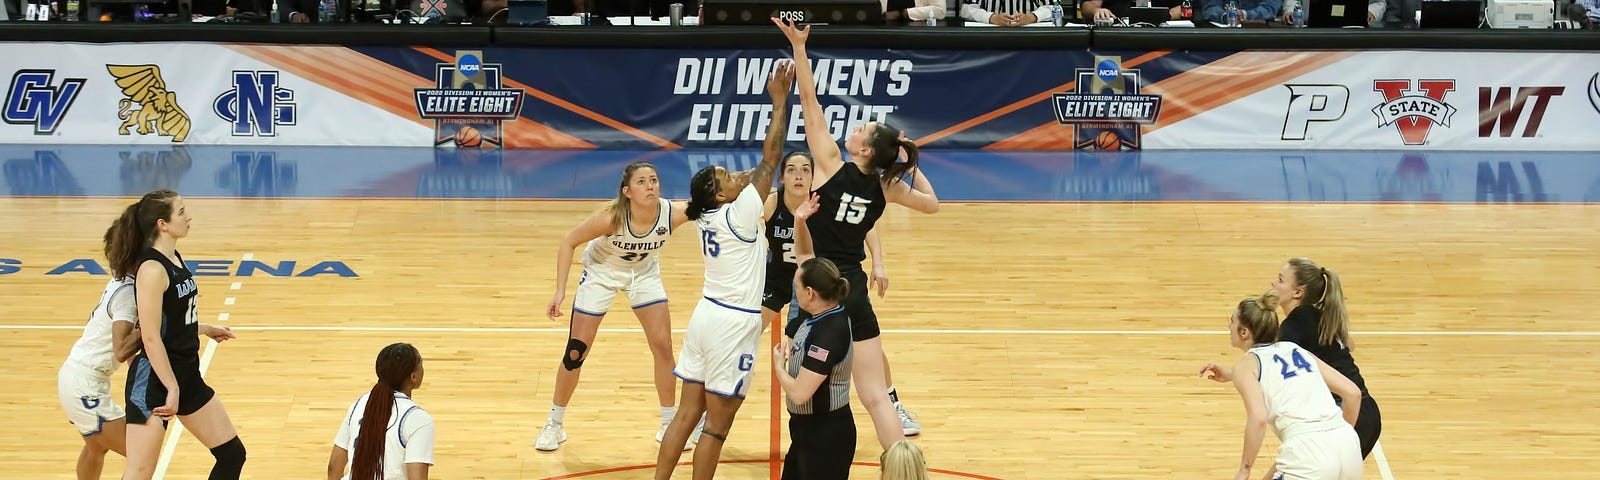 Western’s Brooke Walling competes for the jump ball in the tip-off against opponent Glenville State in the NCAA Division II Women’s Elite Eight Championship game. Both teams wait in a circle around the two players, ready to start a play.